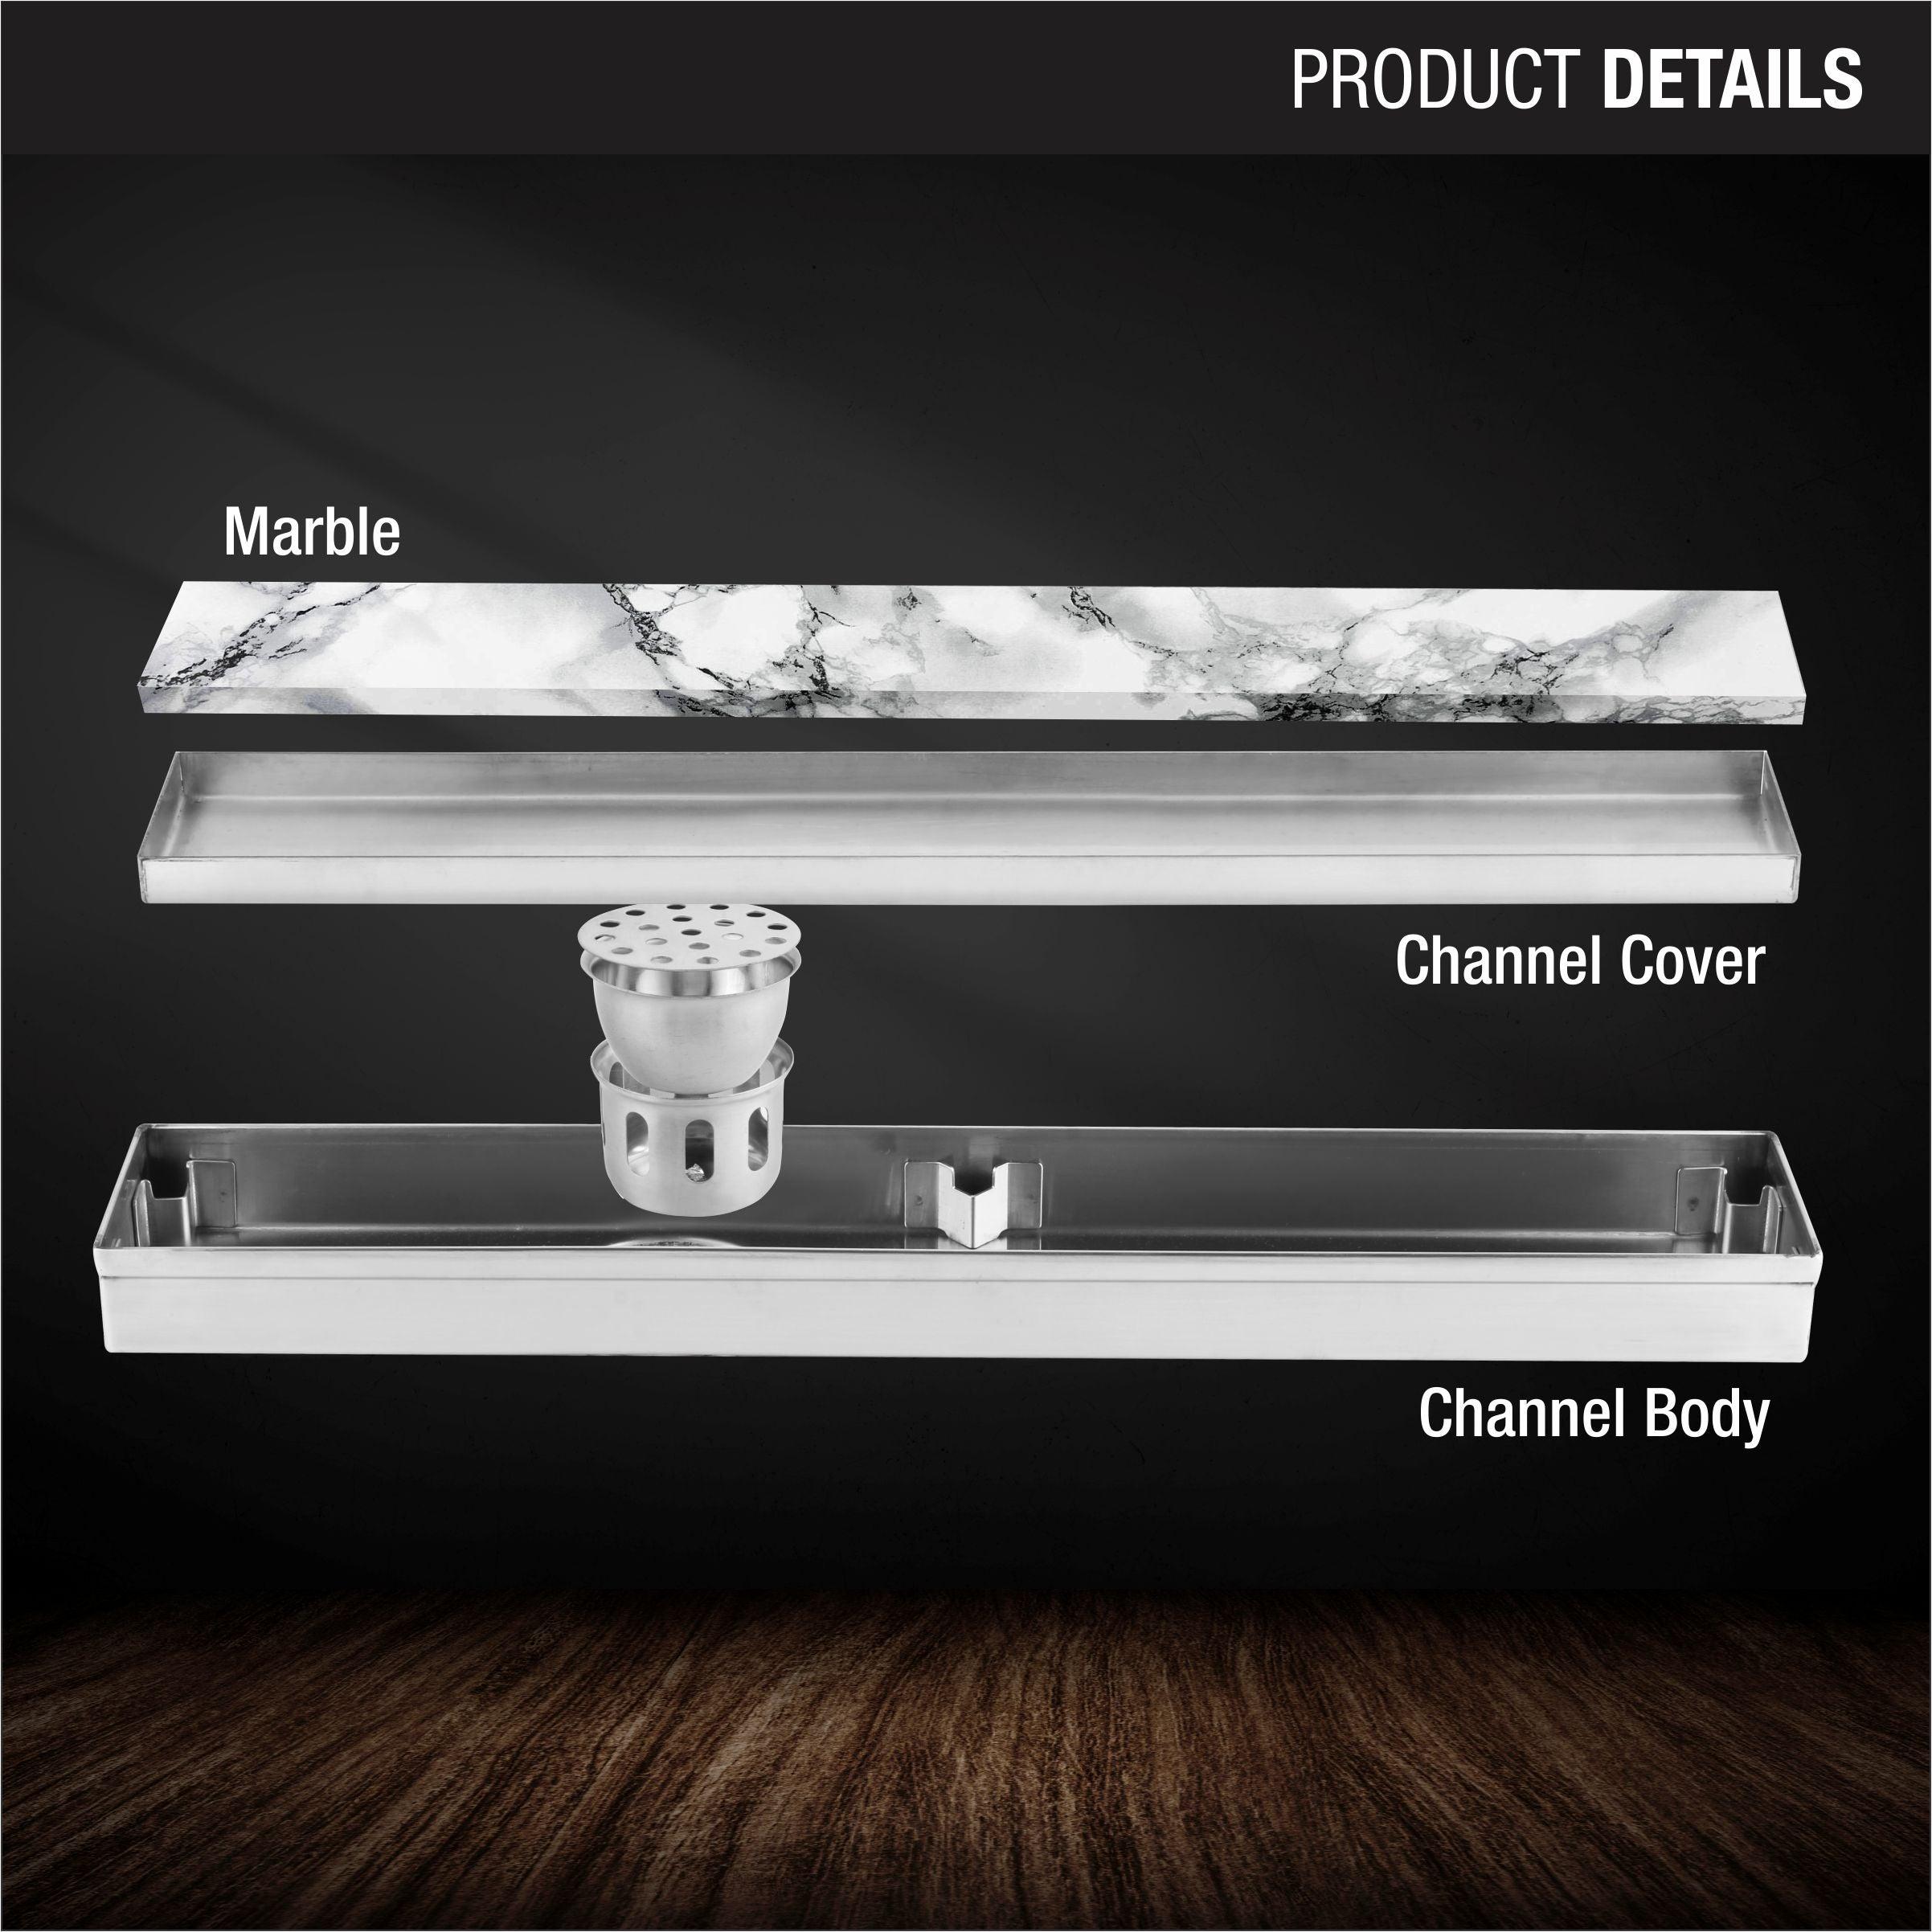 Marble Insert Shower Drain Channel (40 x 4 Inches) product details